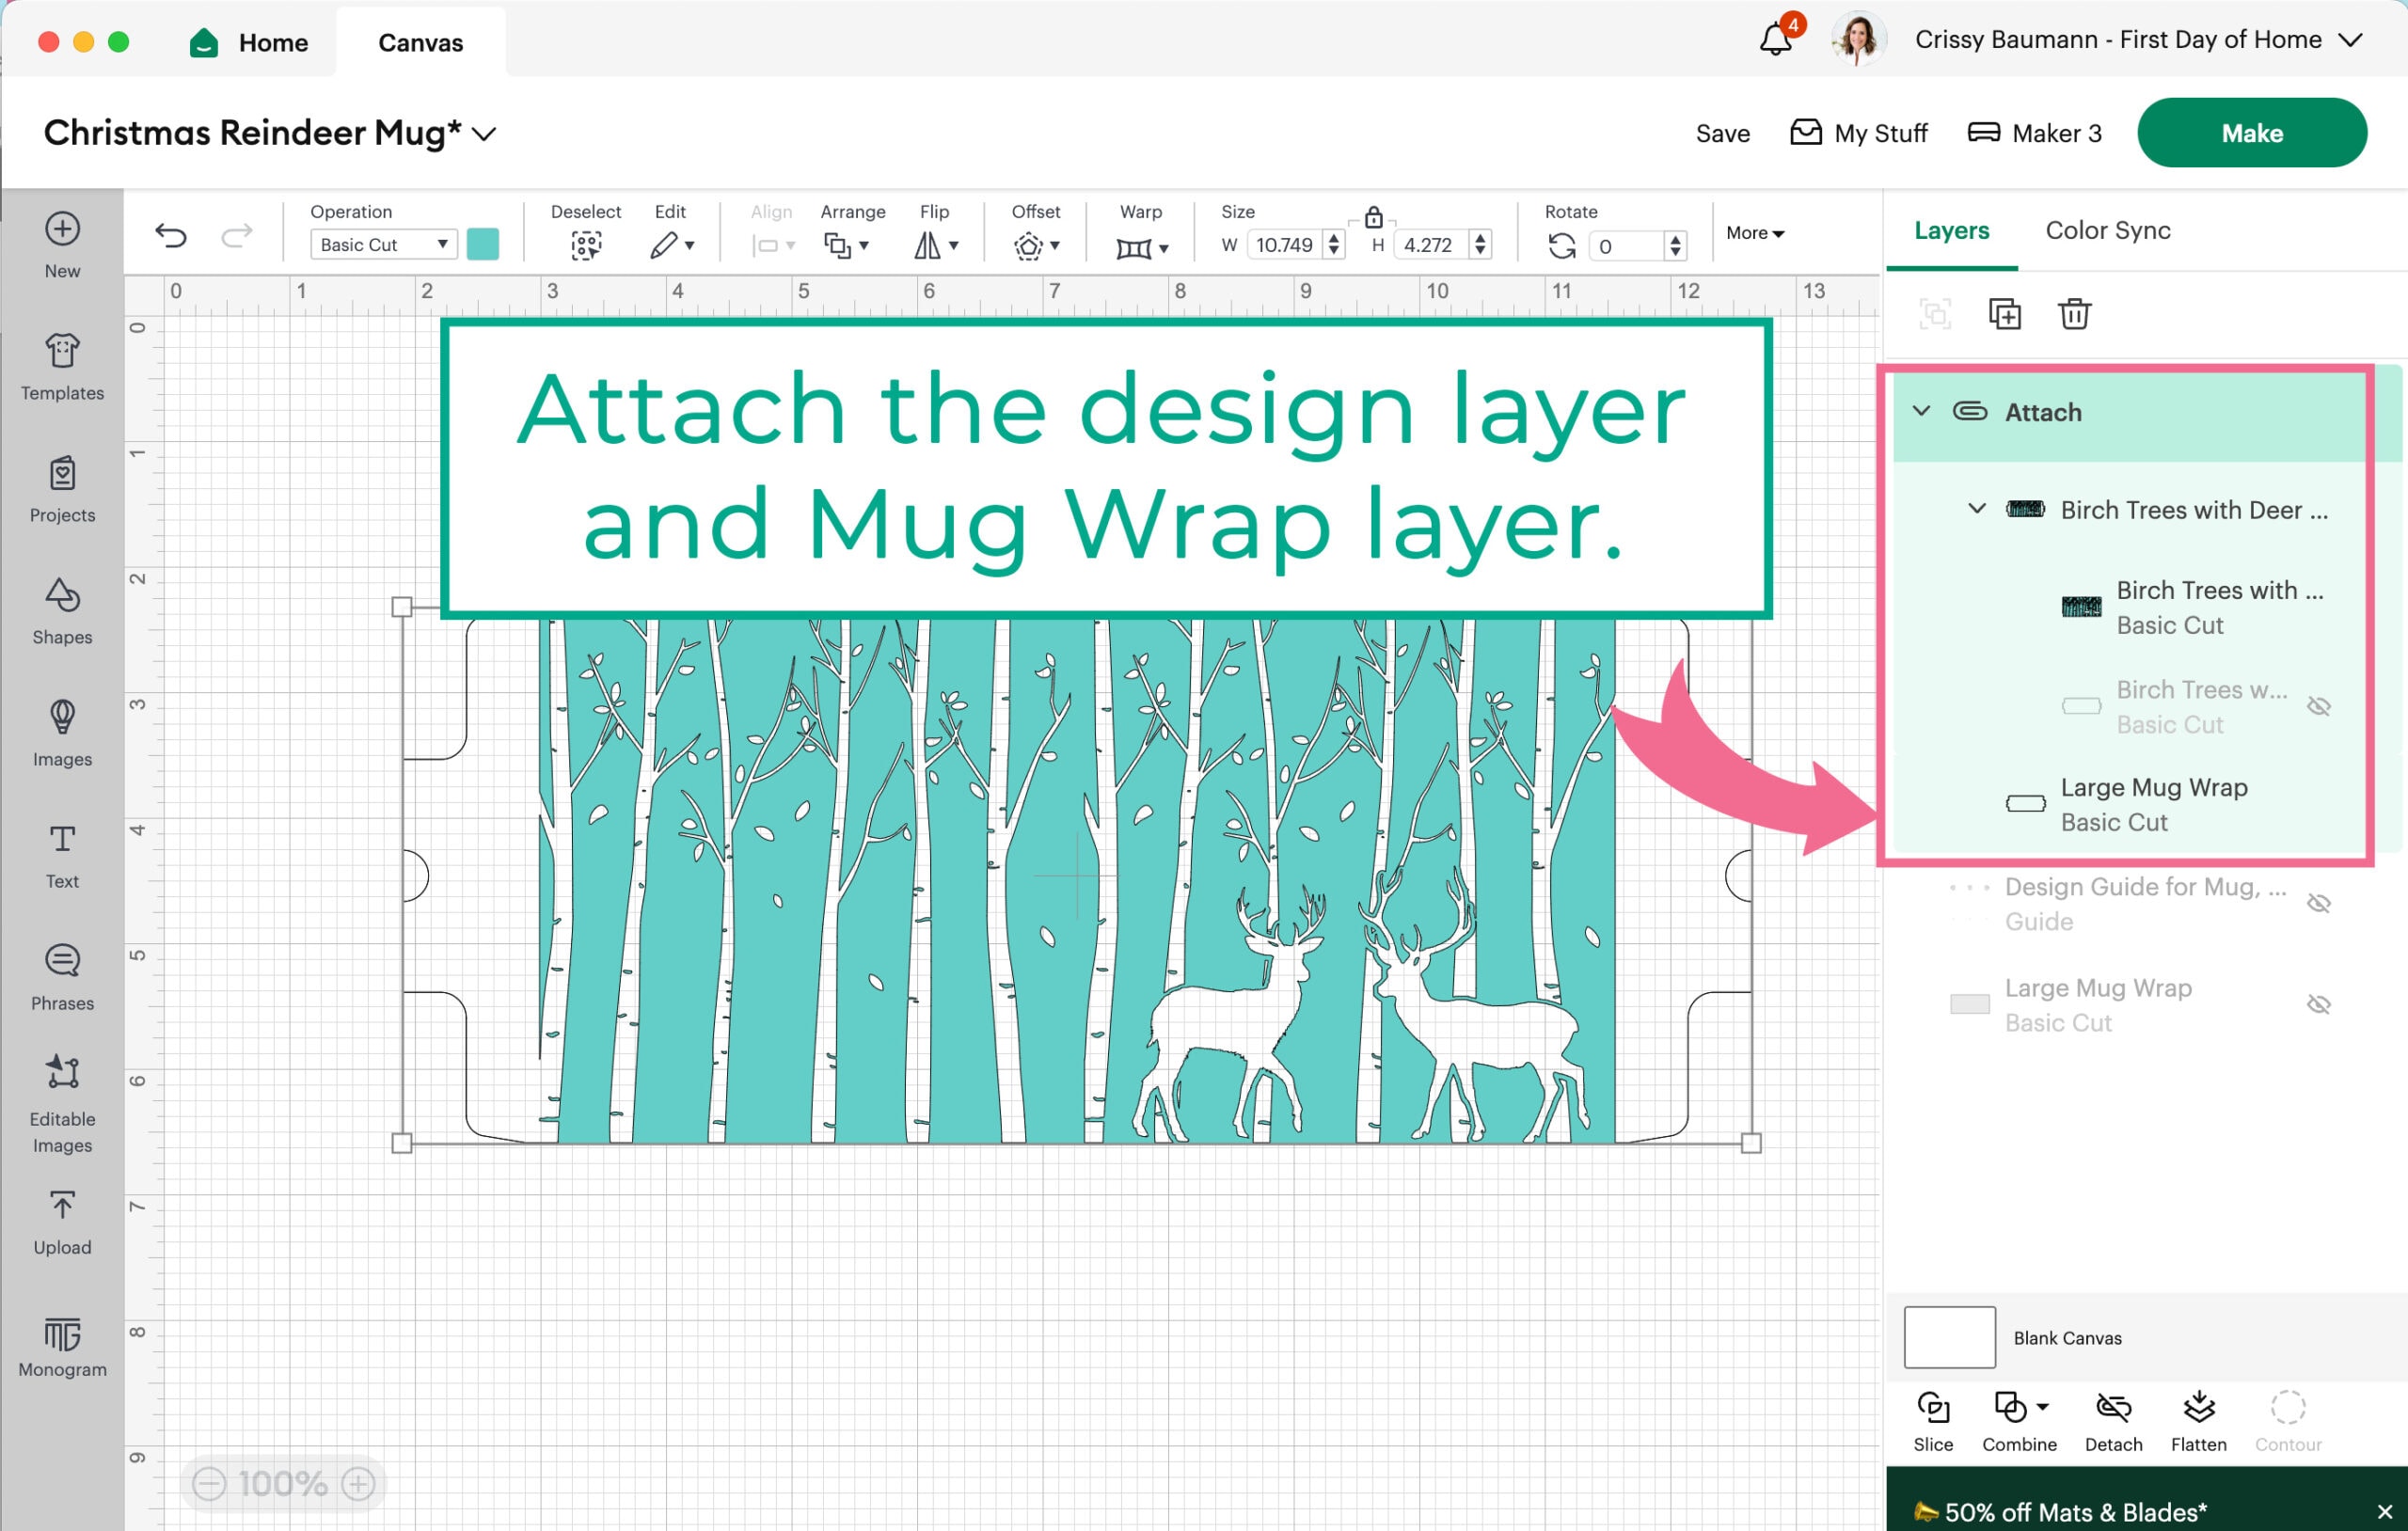 Attaching design layer and outer mug design layer in Cricut Design Space.